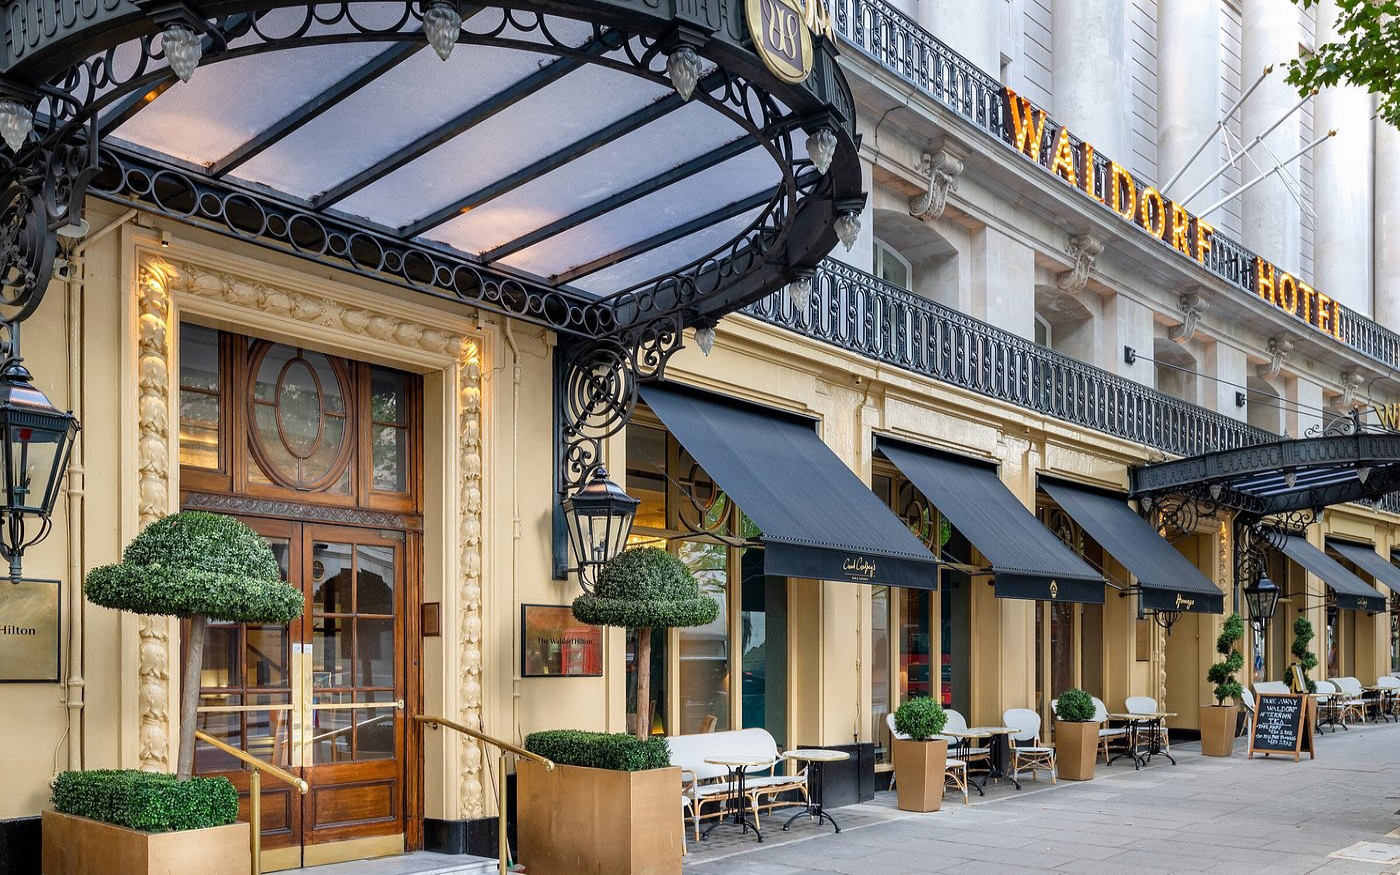 Victorian Awnings at the Waldorf Hotel